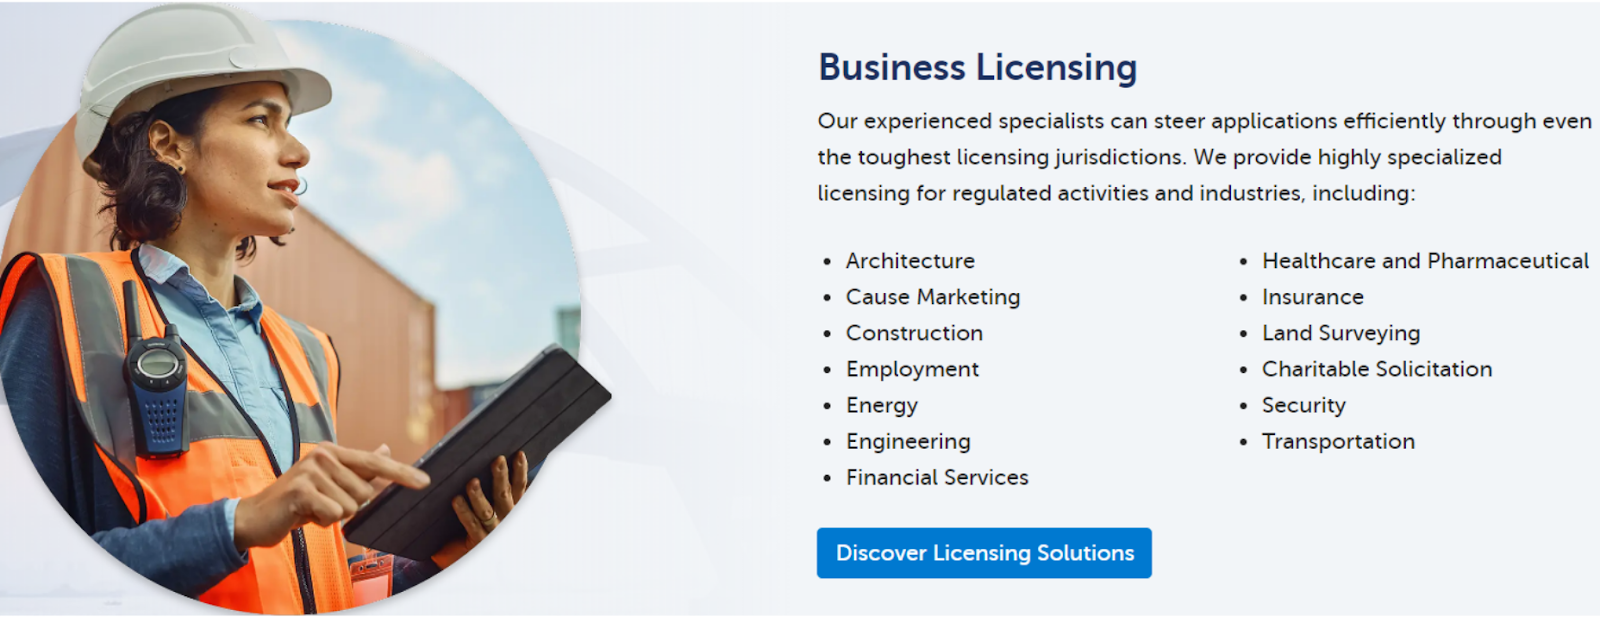 Harbor Compliance's business licensing services